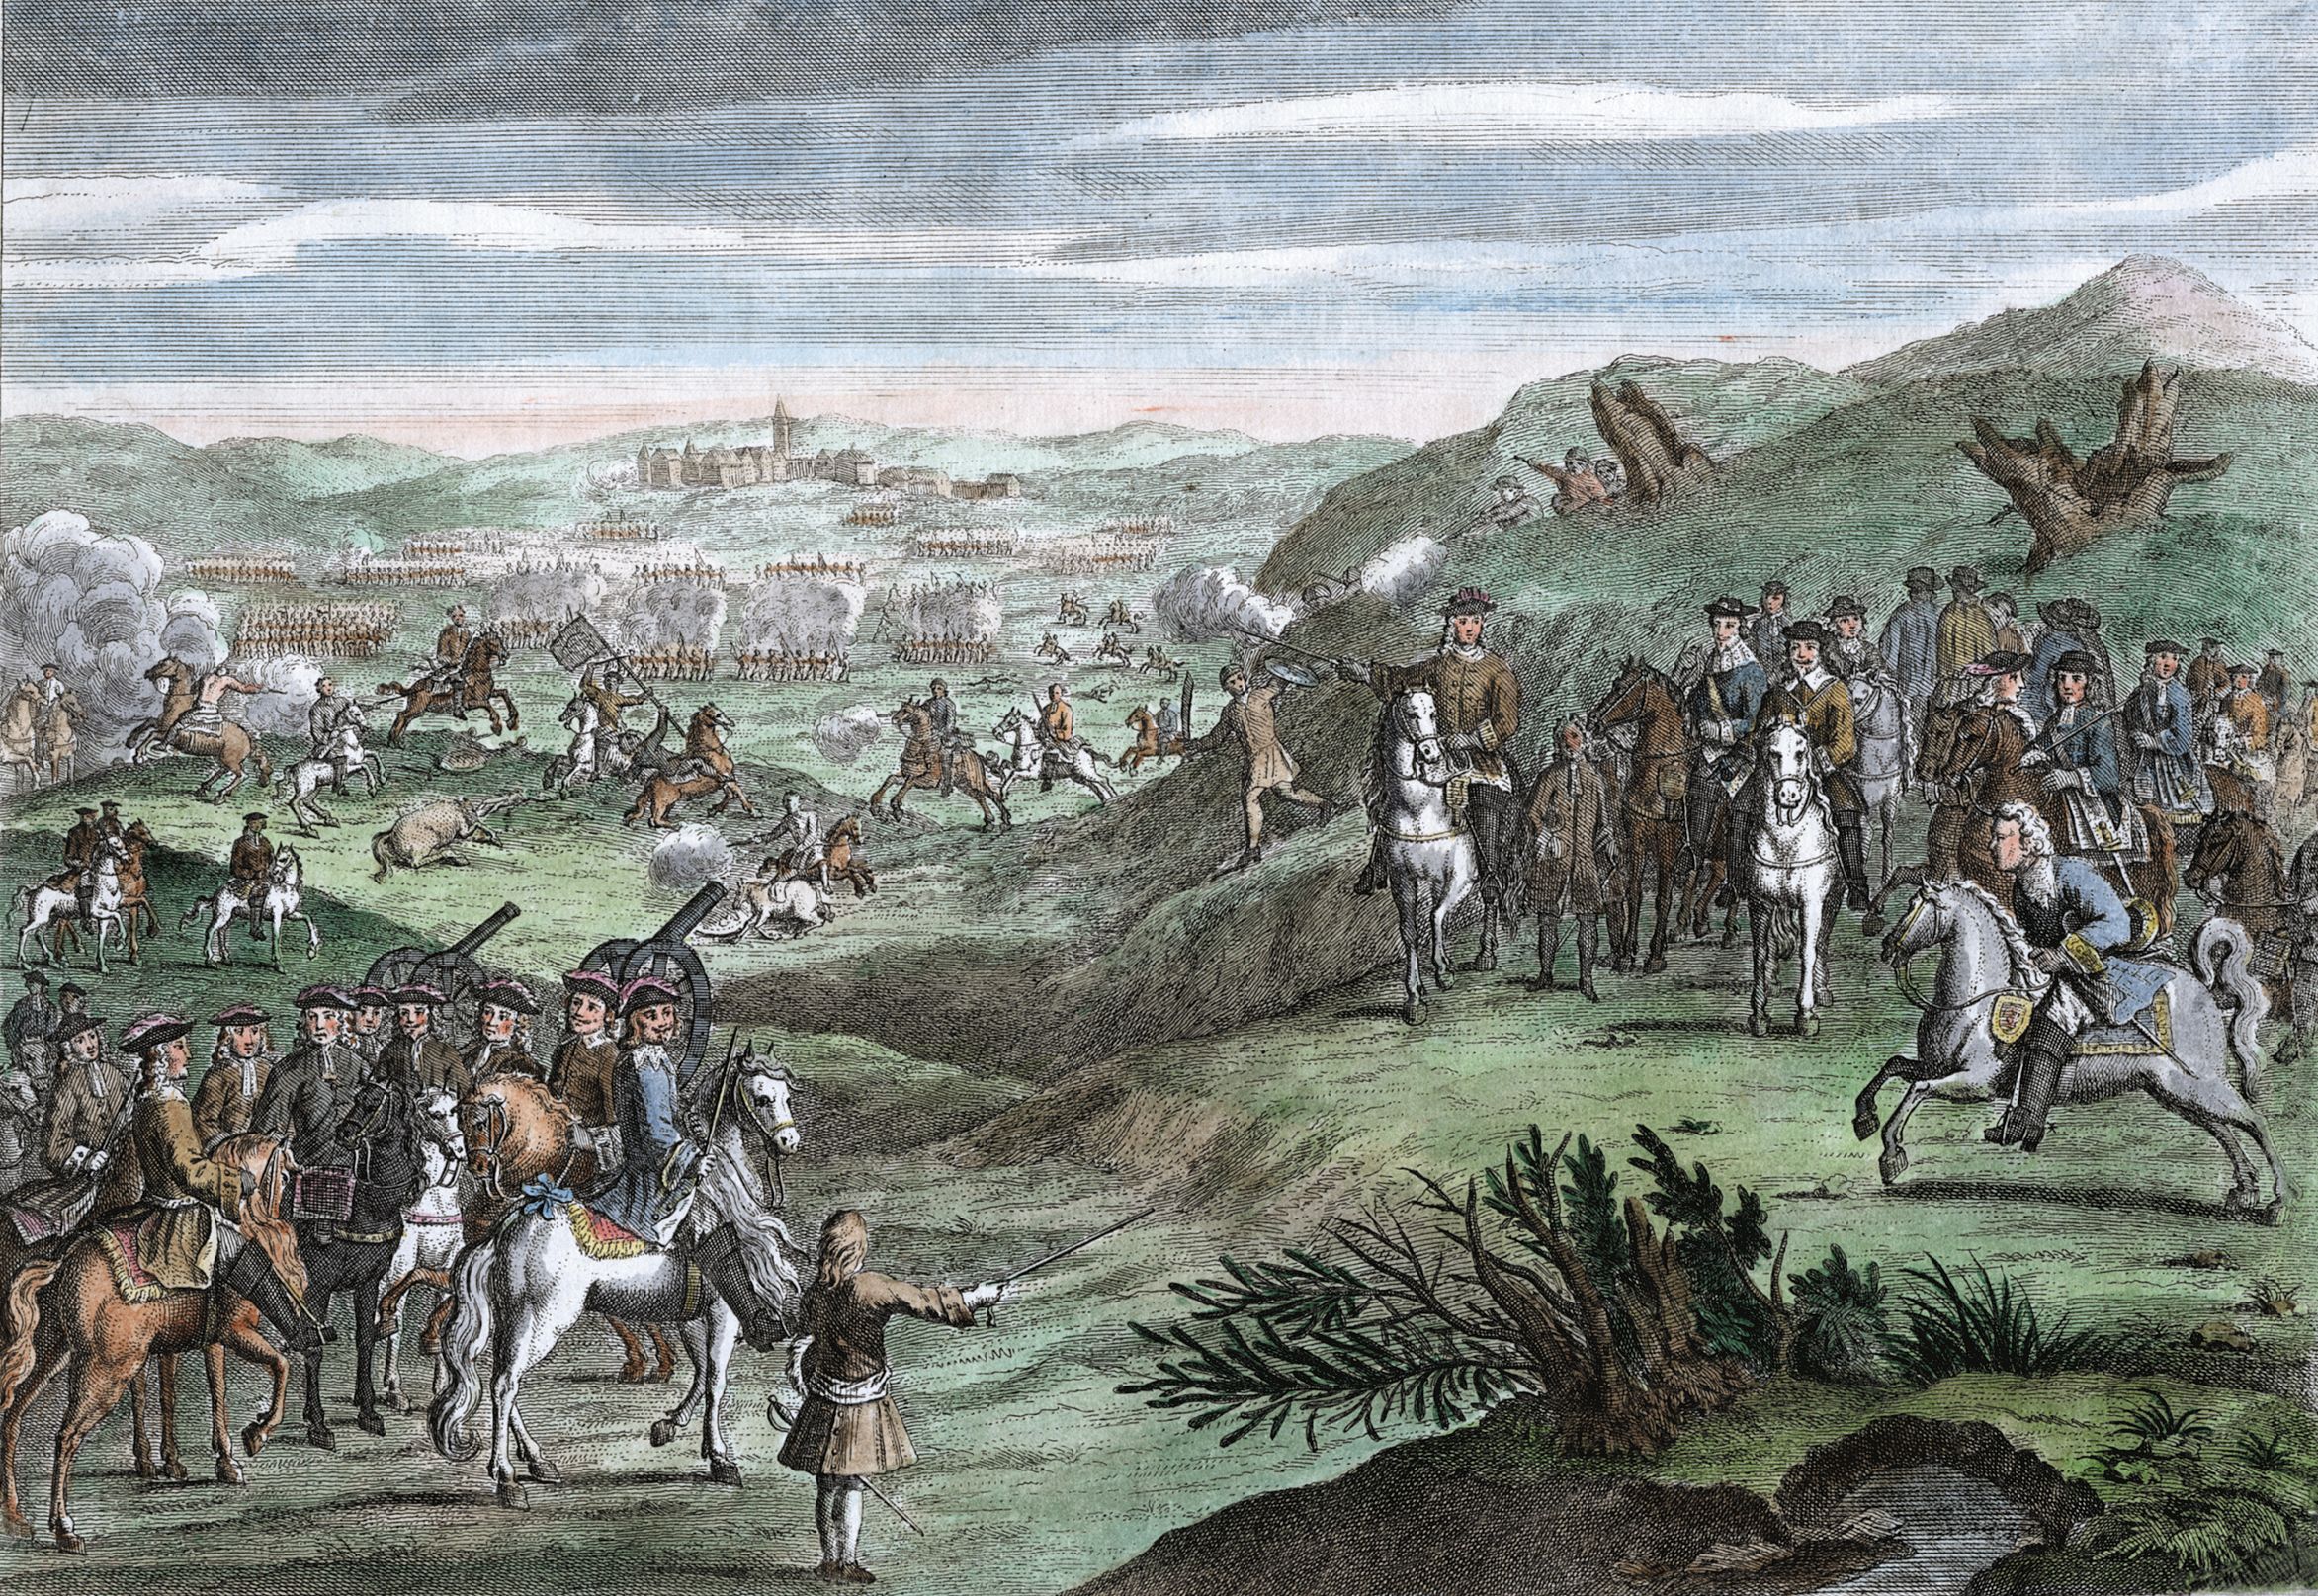 King Charles and his commanders, bottom left, look across the field at Edgehill toward the enemy Roundheads.